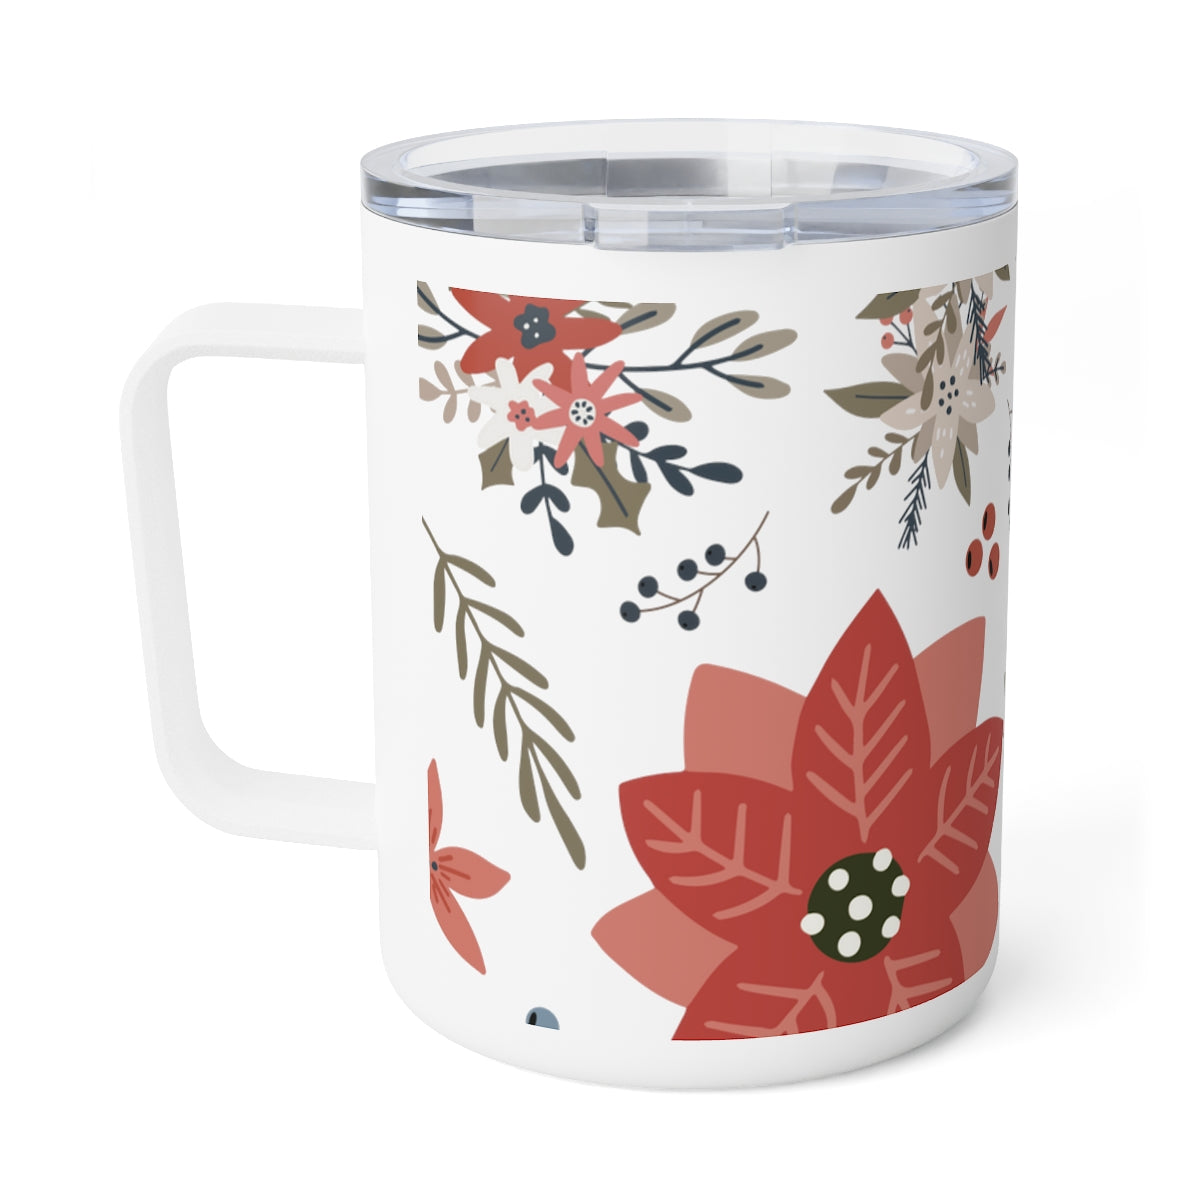 Insulated Coffee Mug, 10oz in the Perfect Poinsettia pattern by